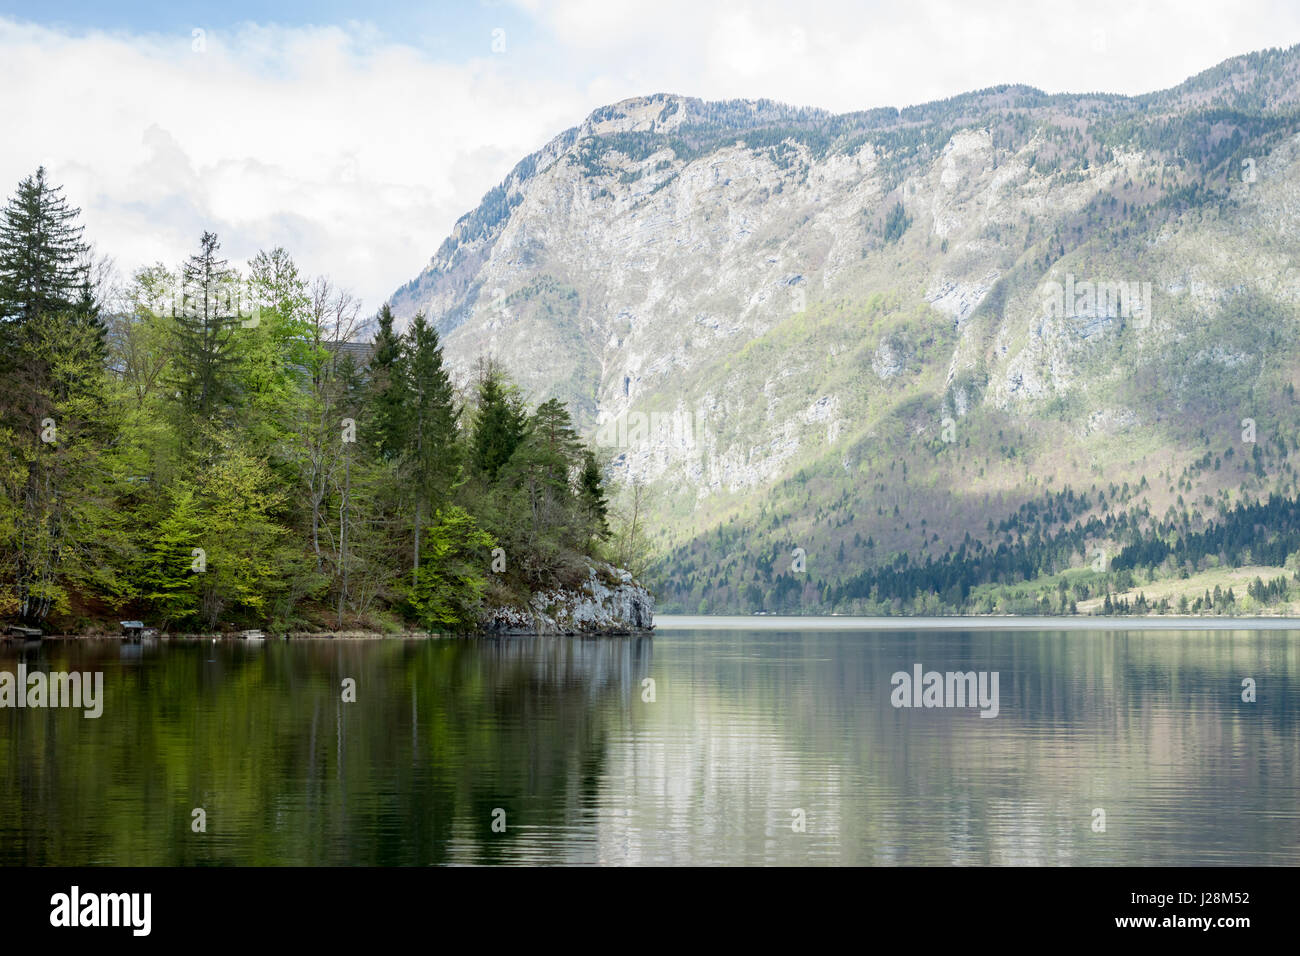 Mountain lake with crystal clear water Stock Photo